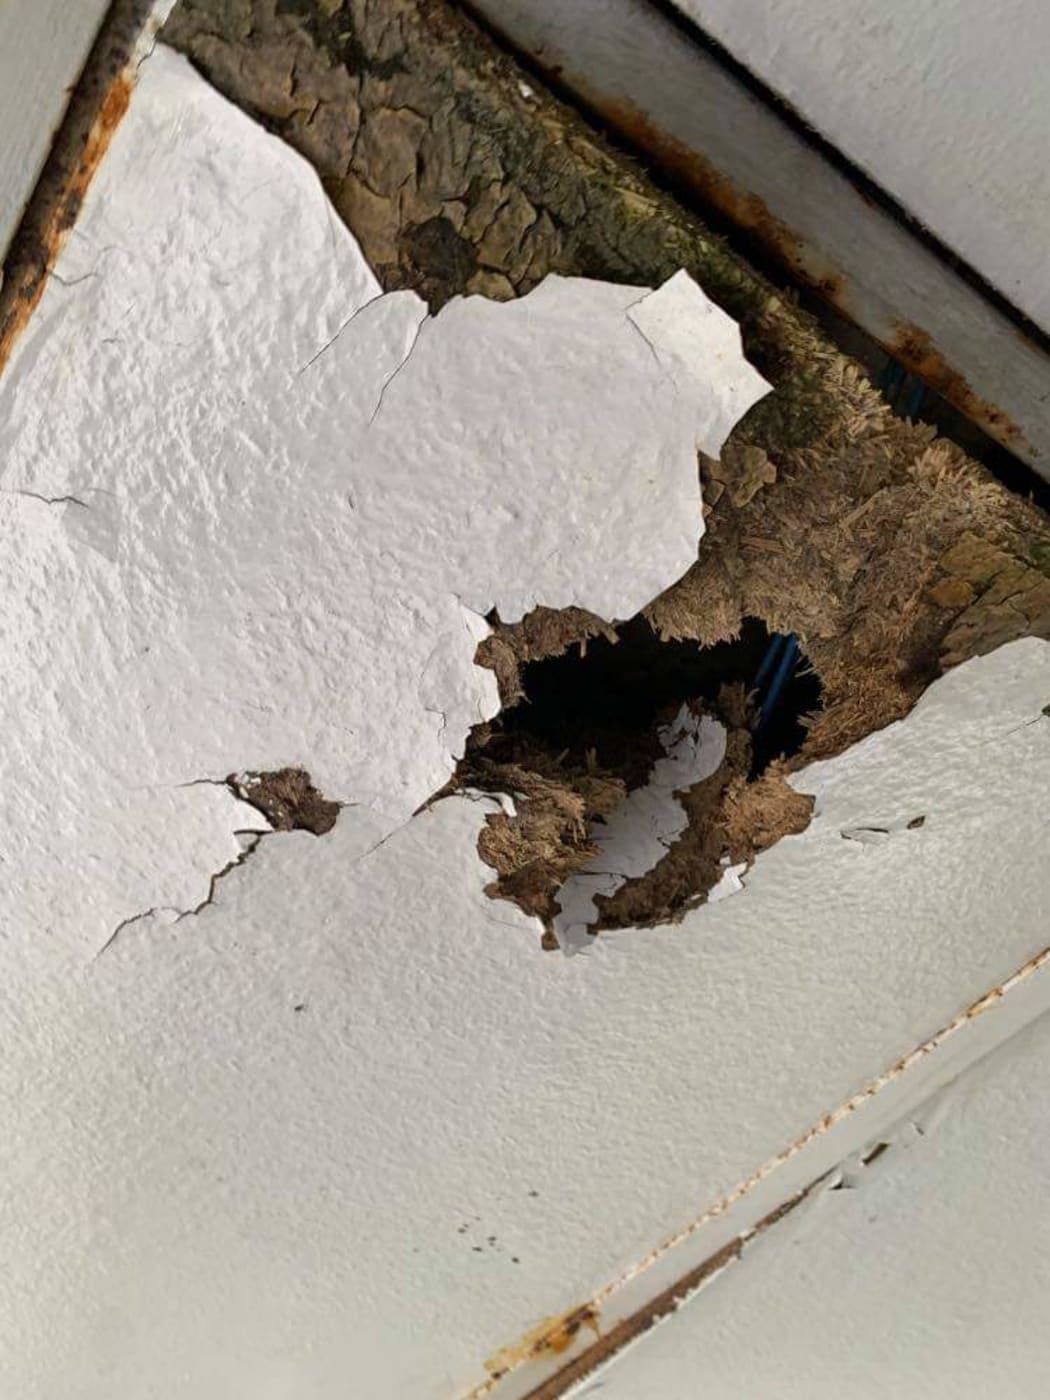 A block of classrooms at Hutt Valley High School has had to shut due to mould and leakage problems.